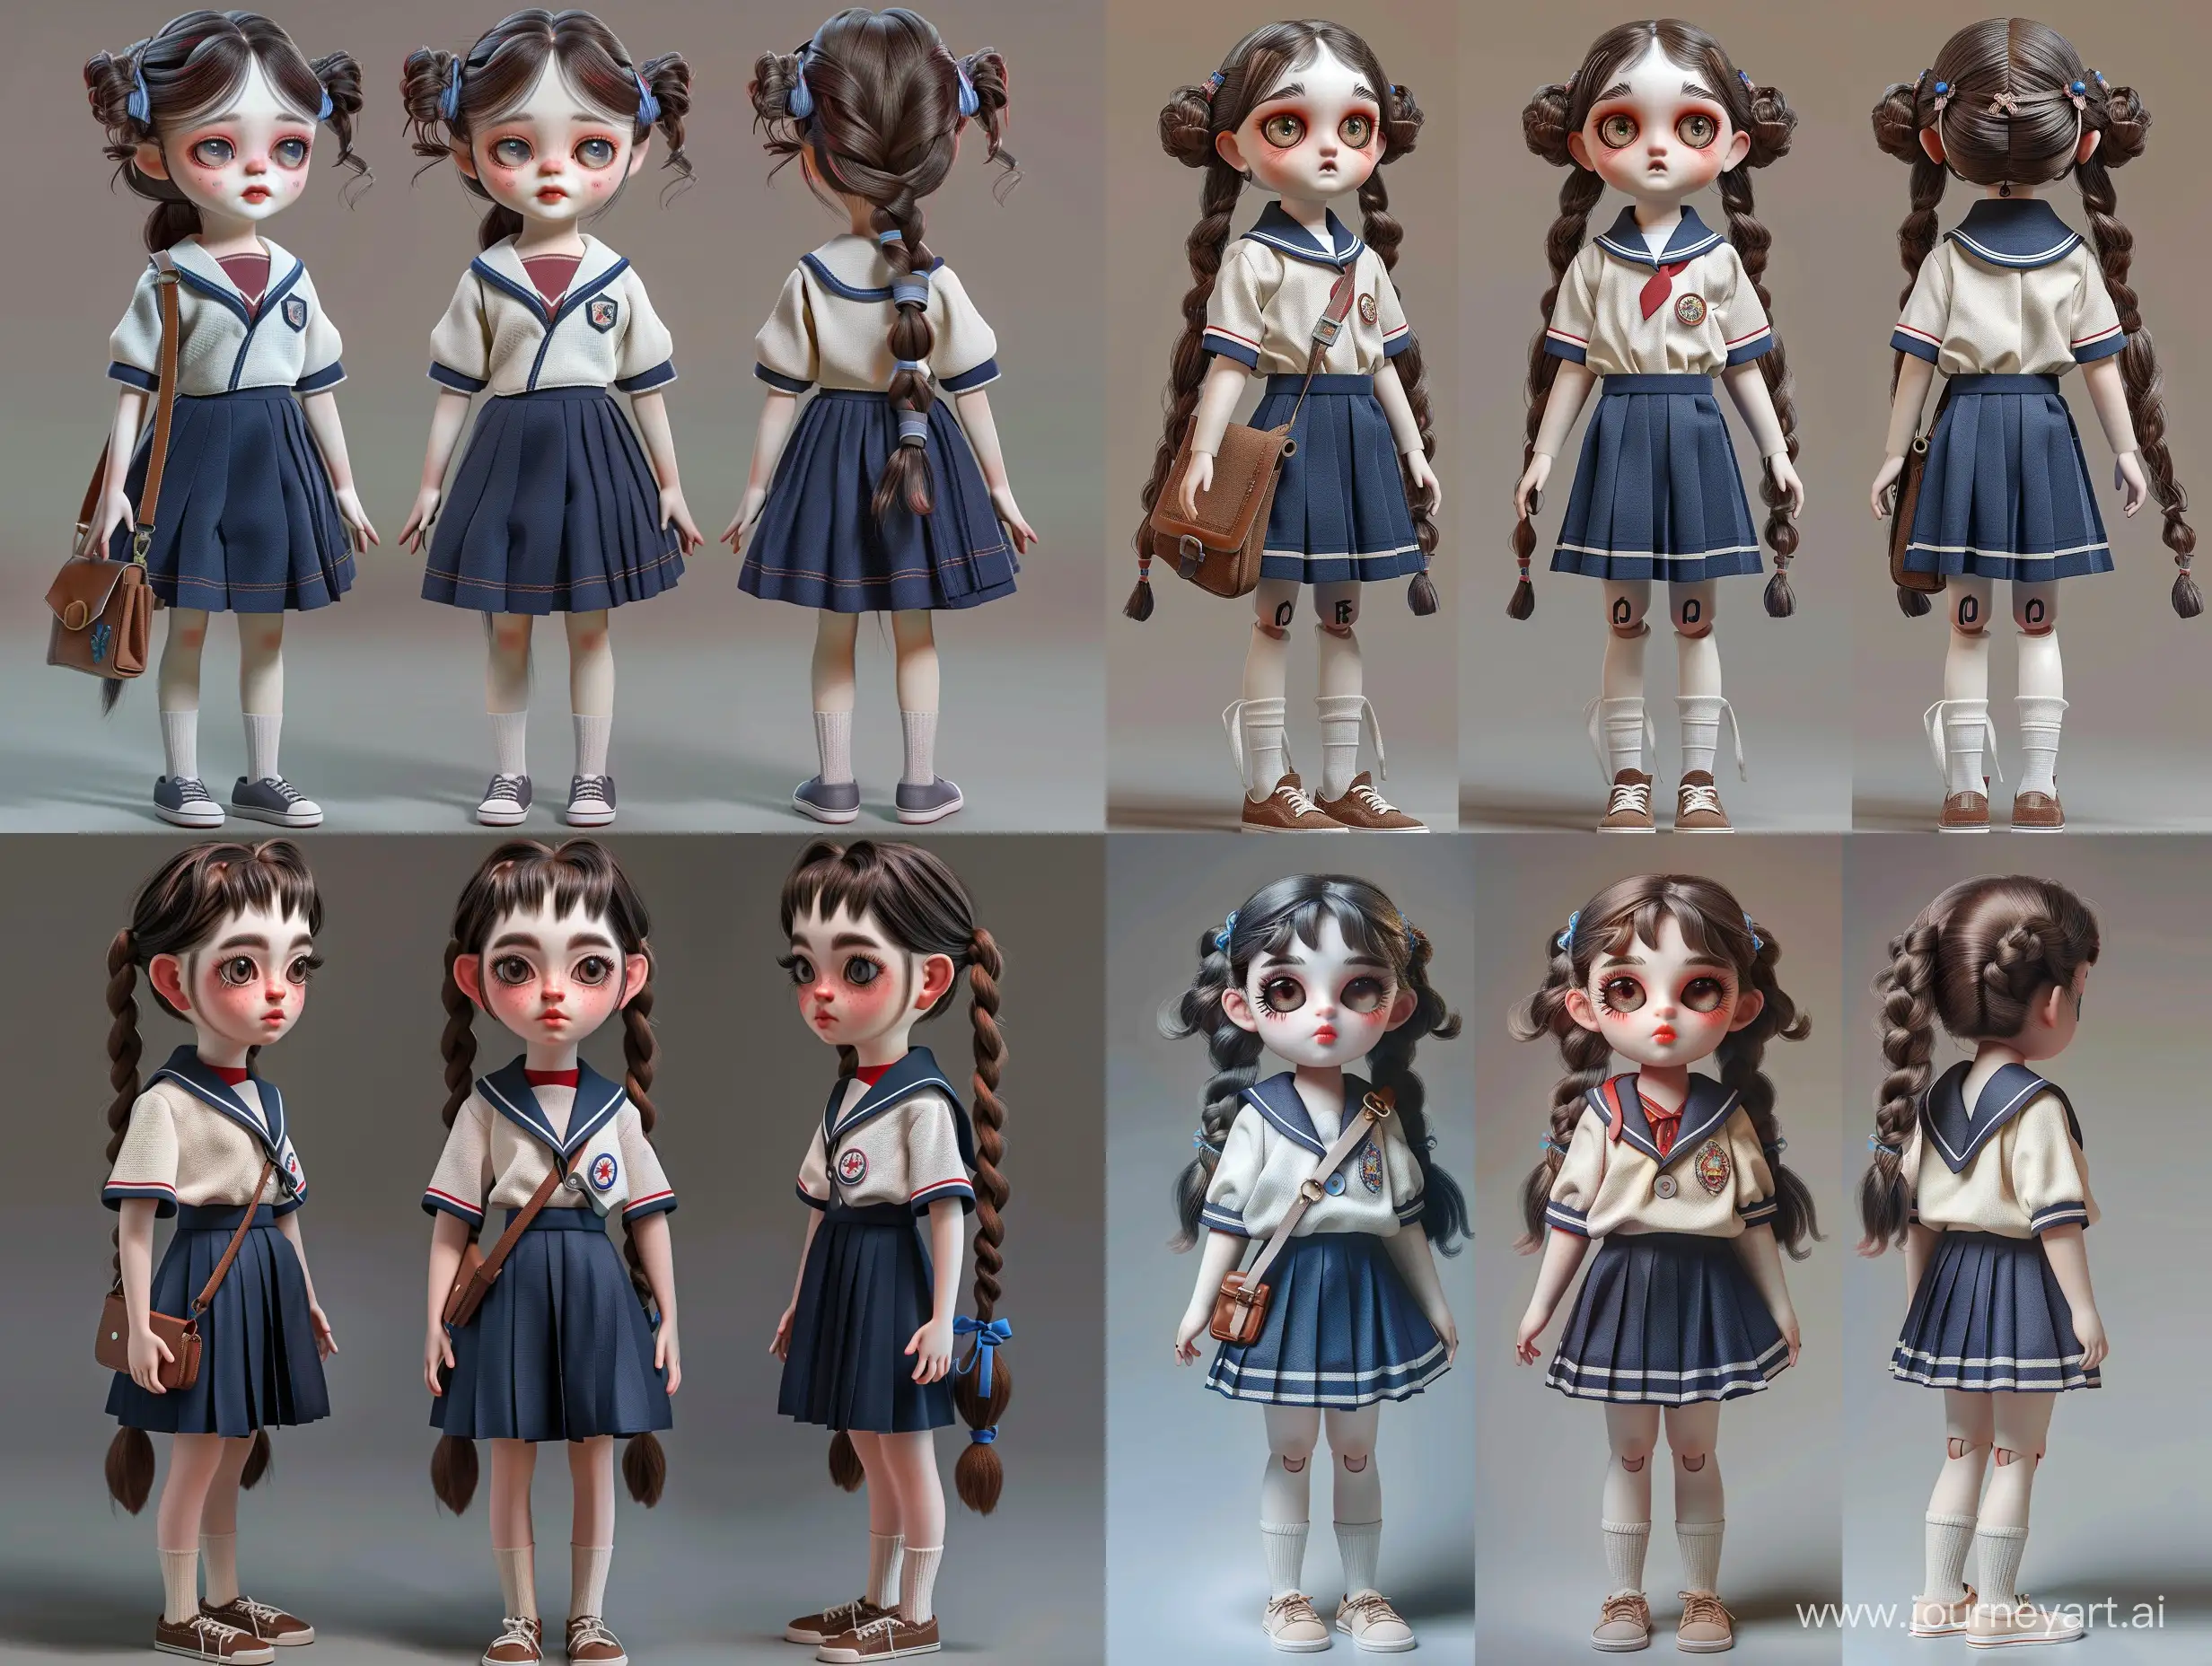 Adorable-Anime-Doll-Character-in-School-Uniform-Poses-Front-ThreeQuarter-and-Side-Views